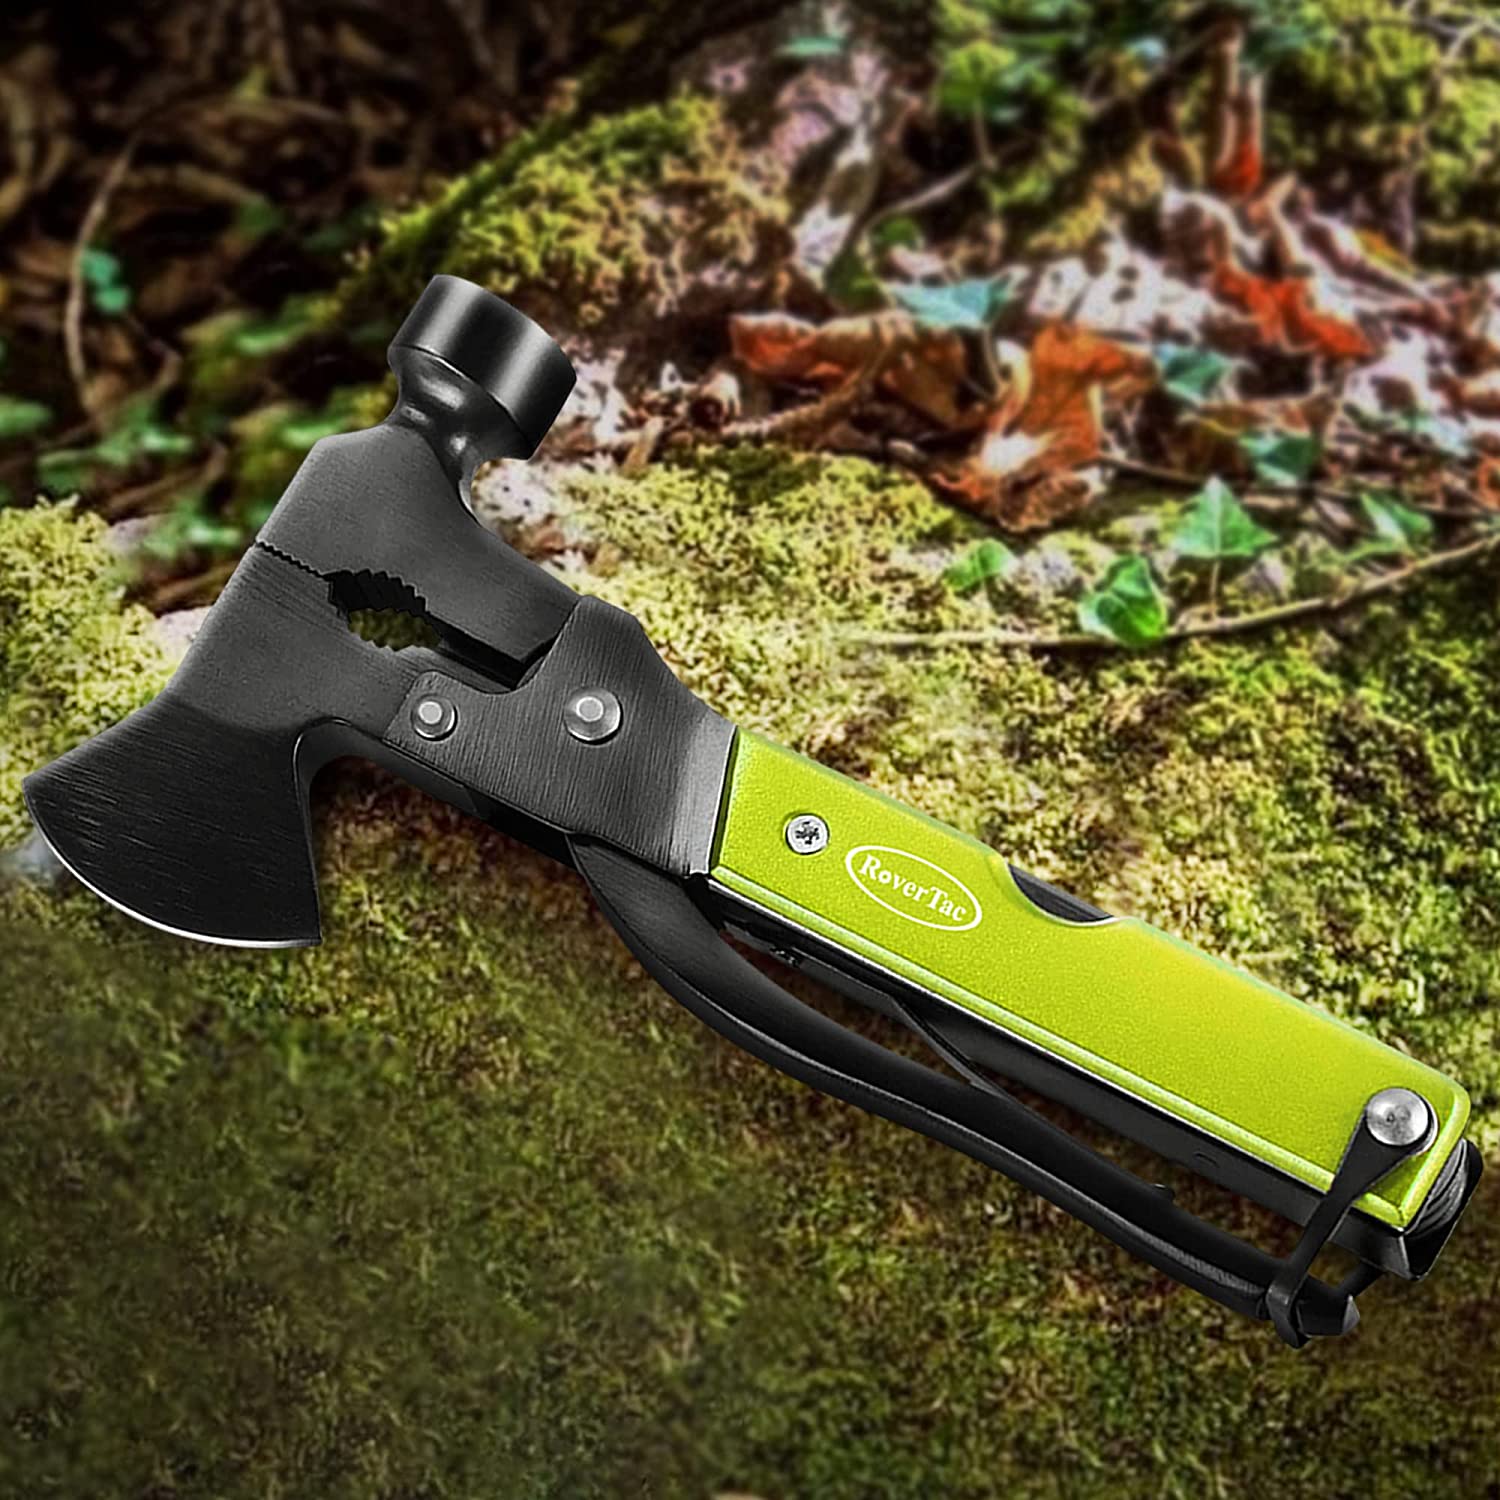 RoverTac Multitool Axe Hatchet Camping Survival Gear Christmas Gifts for Dad Men Husband Him 14-in-1 Multi Tool Gadgets for Mens Gifts Dad Gifts Perfect Multitool Gifts for Camping Hiking Survival